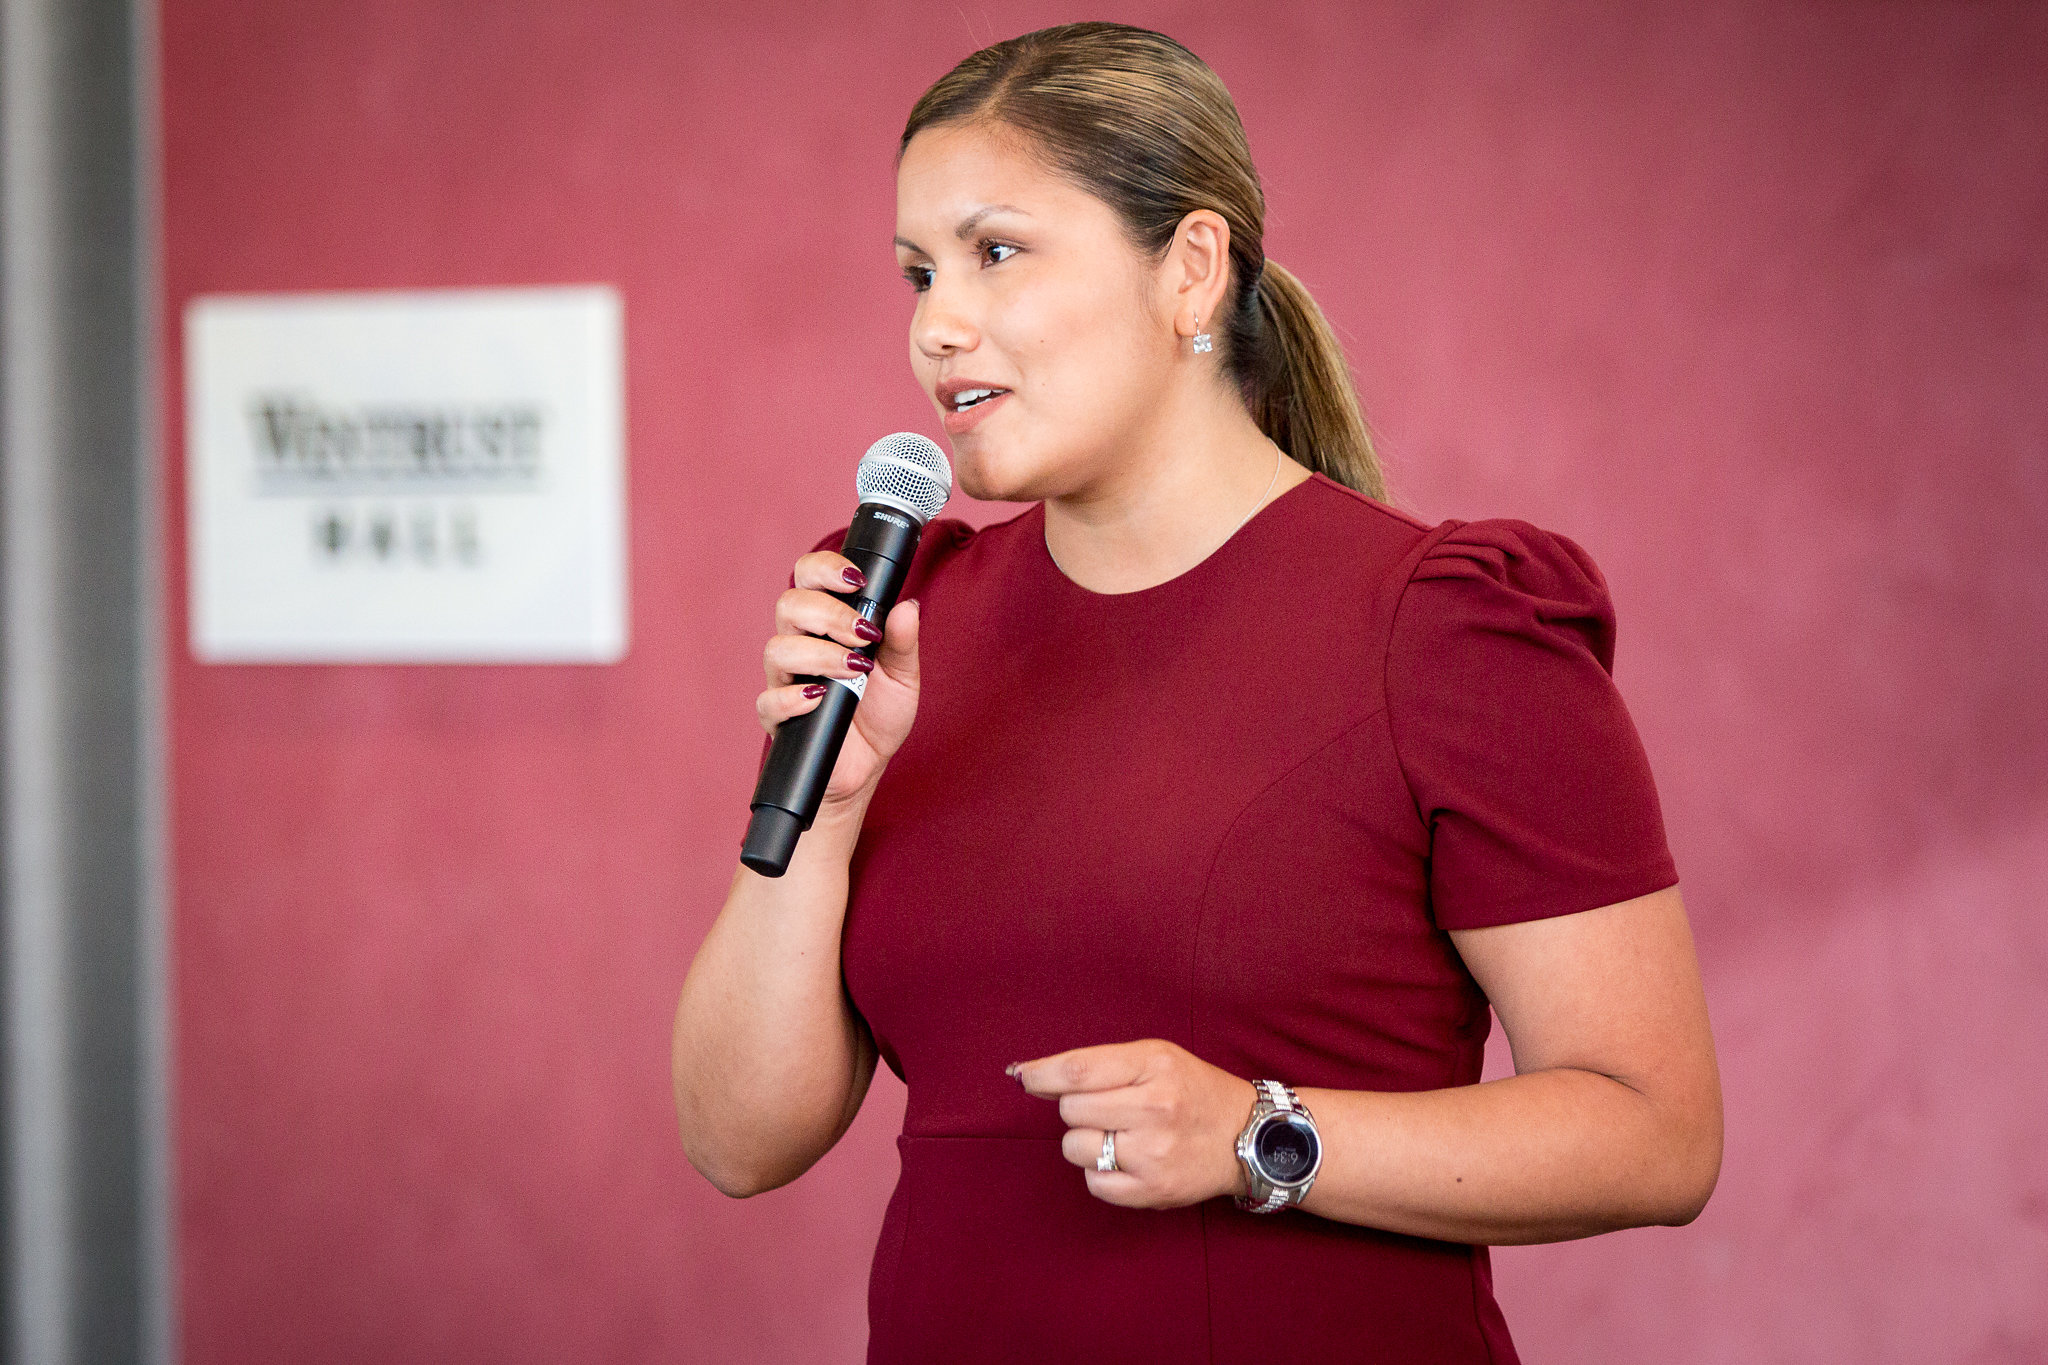 Grisel Maldonado, was awarded $15,000 toward her plan to expand the scope of Avanza Strategies, her educational program strategy consulting firm, to serve 20,000 students across 10 cities by 2020.